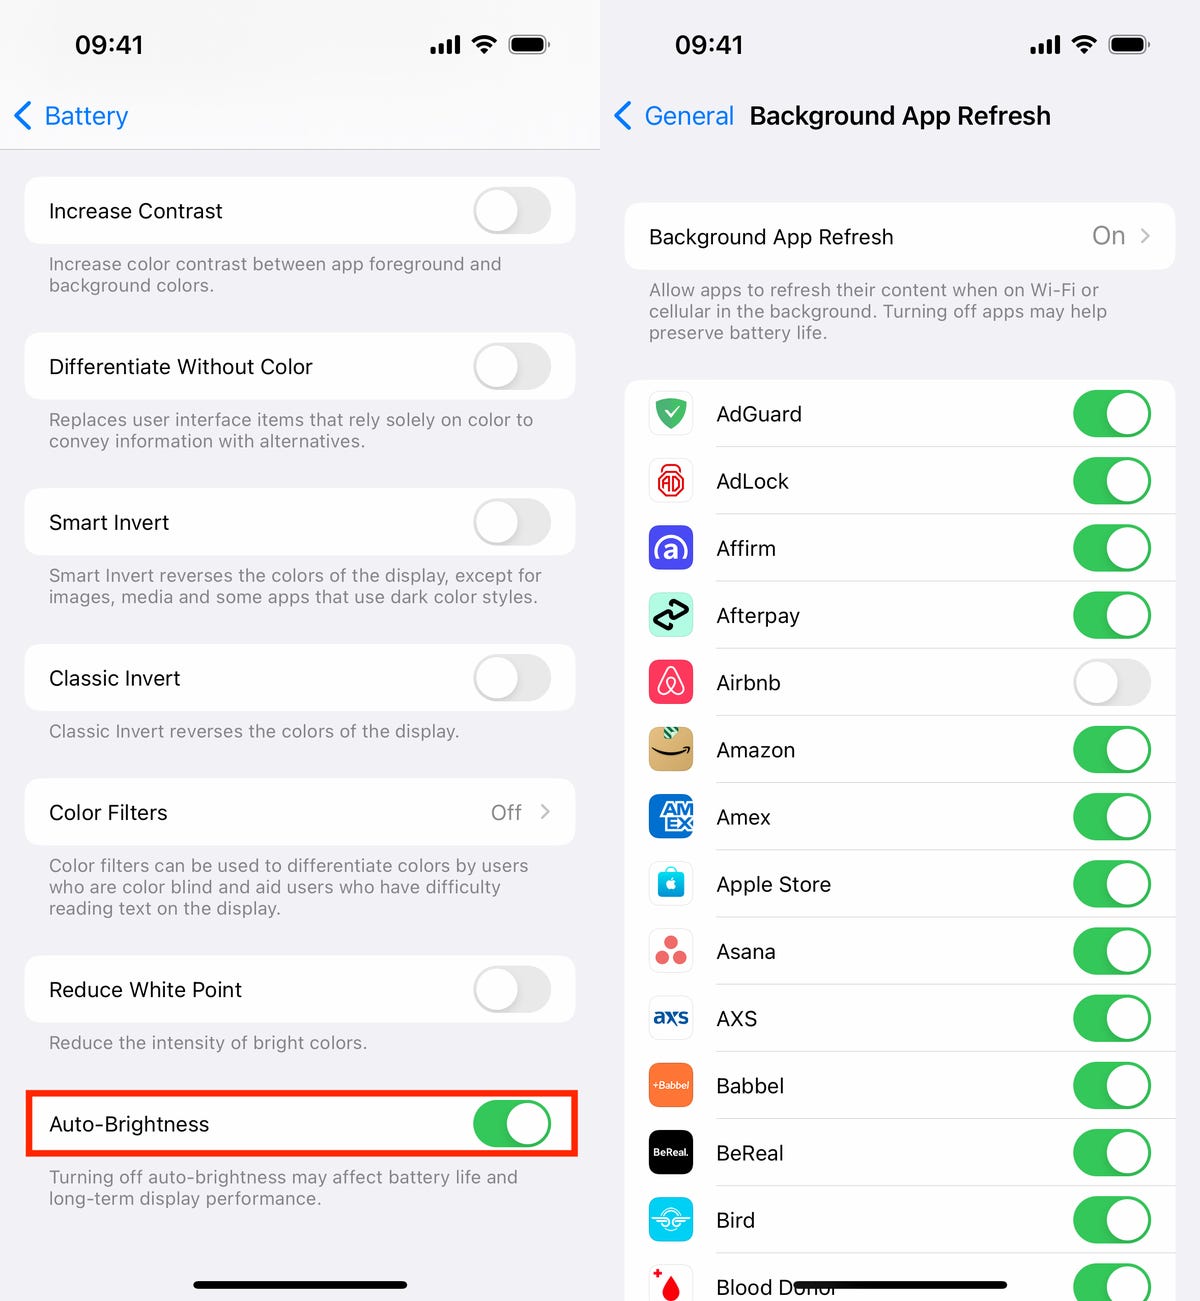 Two iOS settings to help keep your battery's health